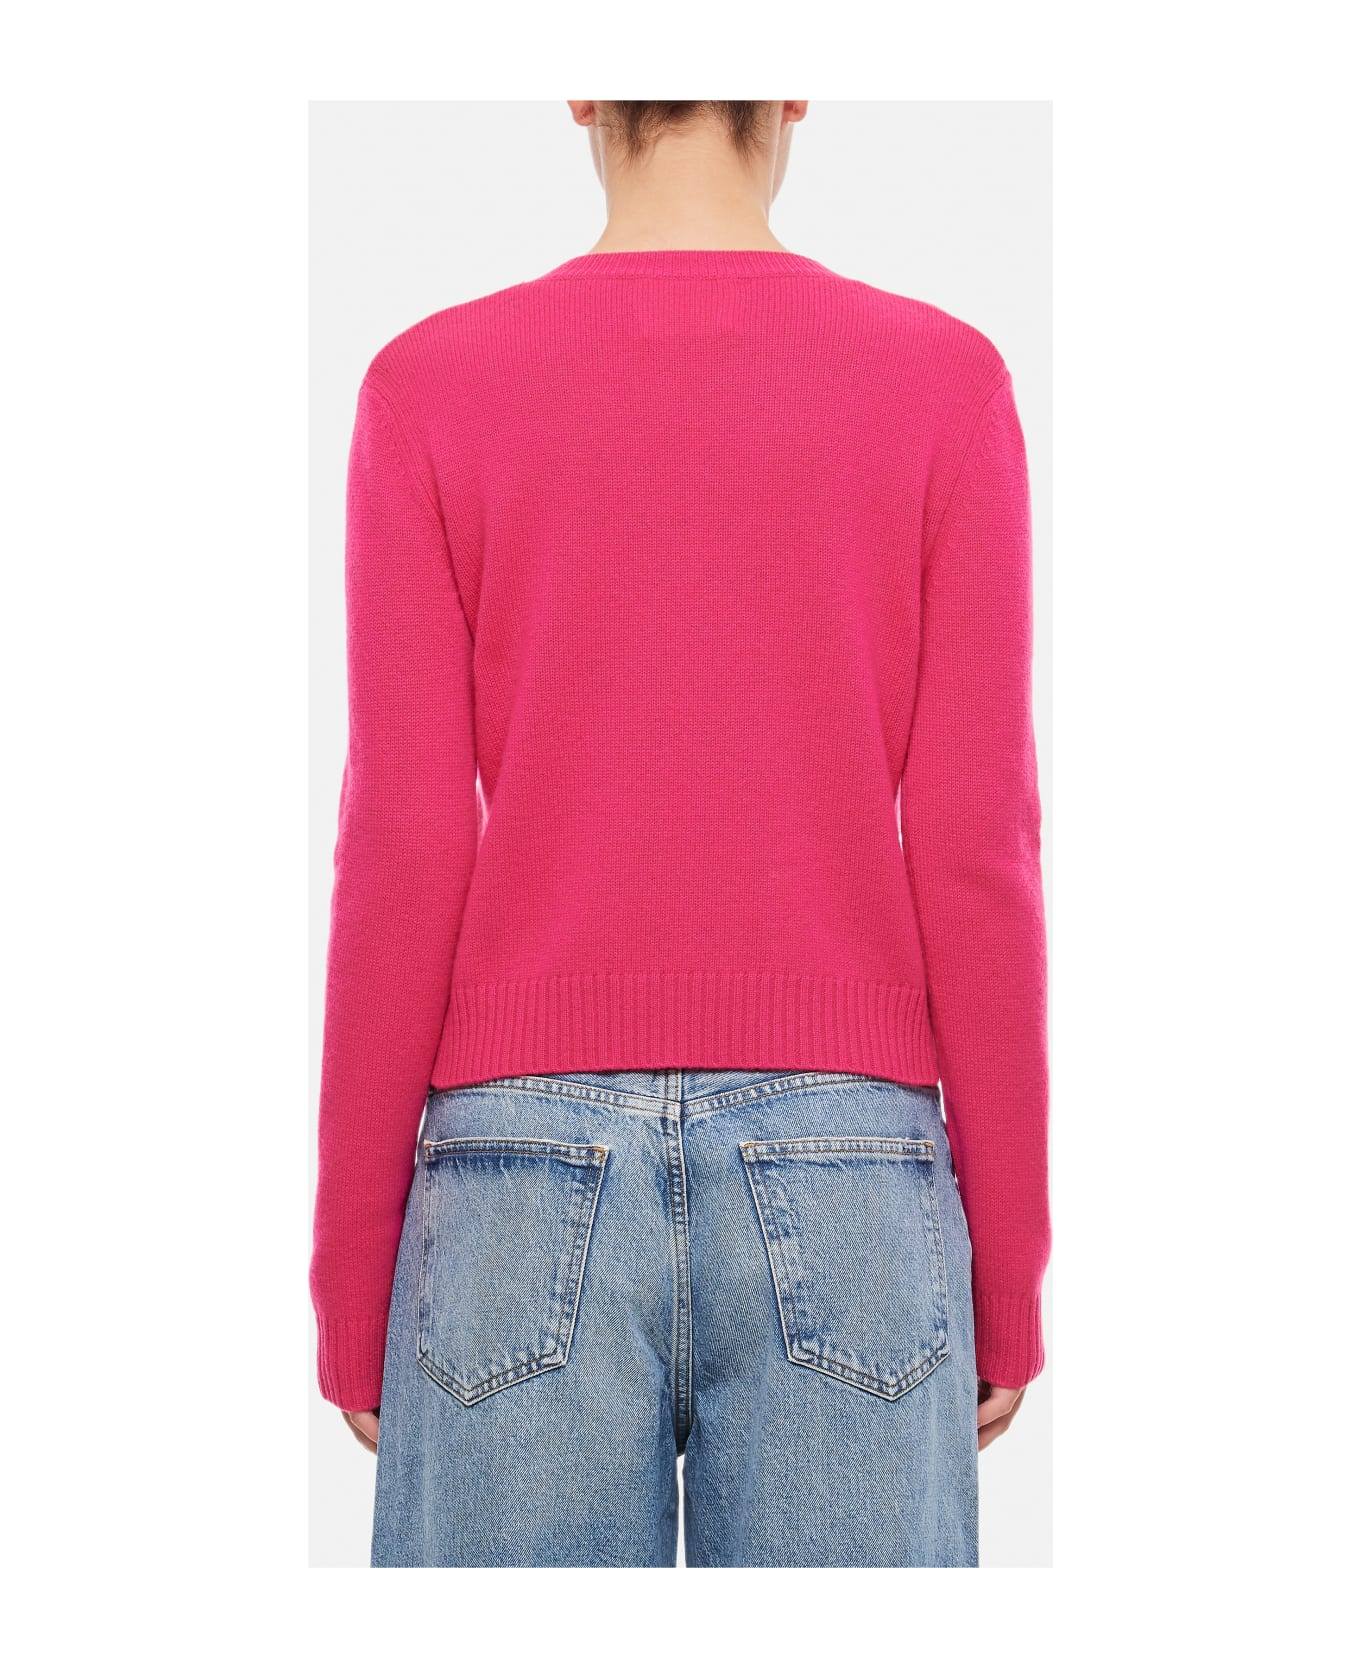 Lisa Yang Mable Cashmere Sweater - Pink ニットウェア